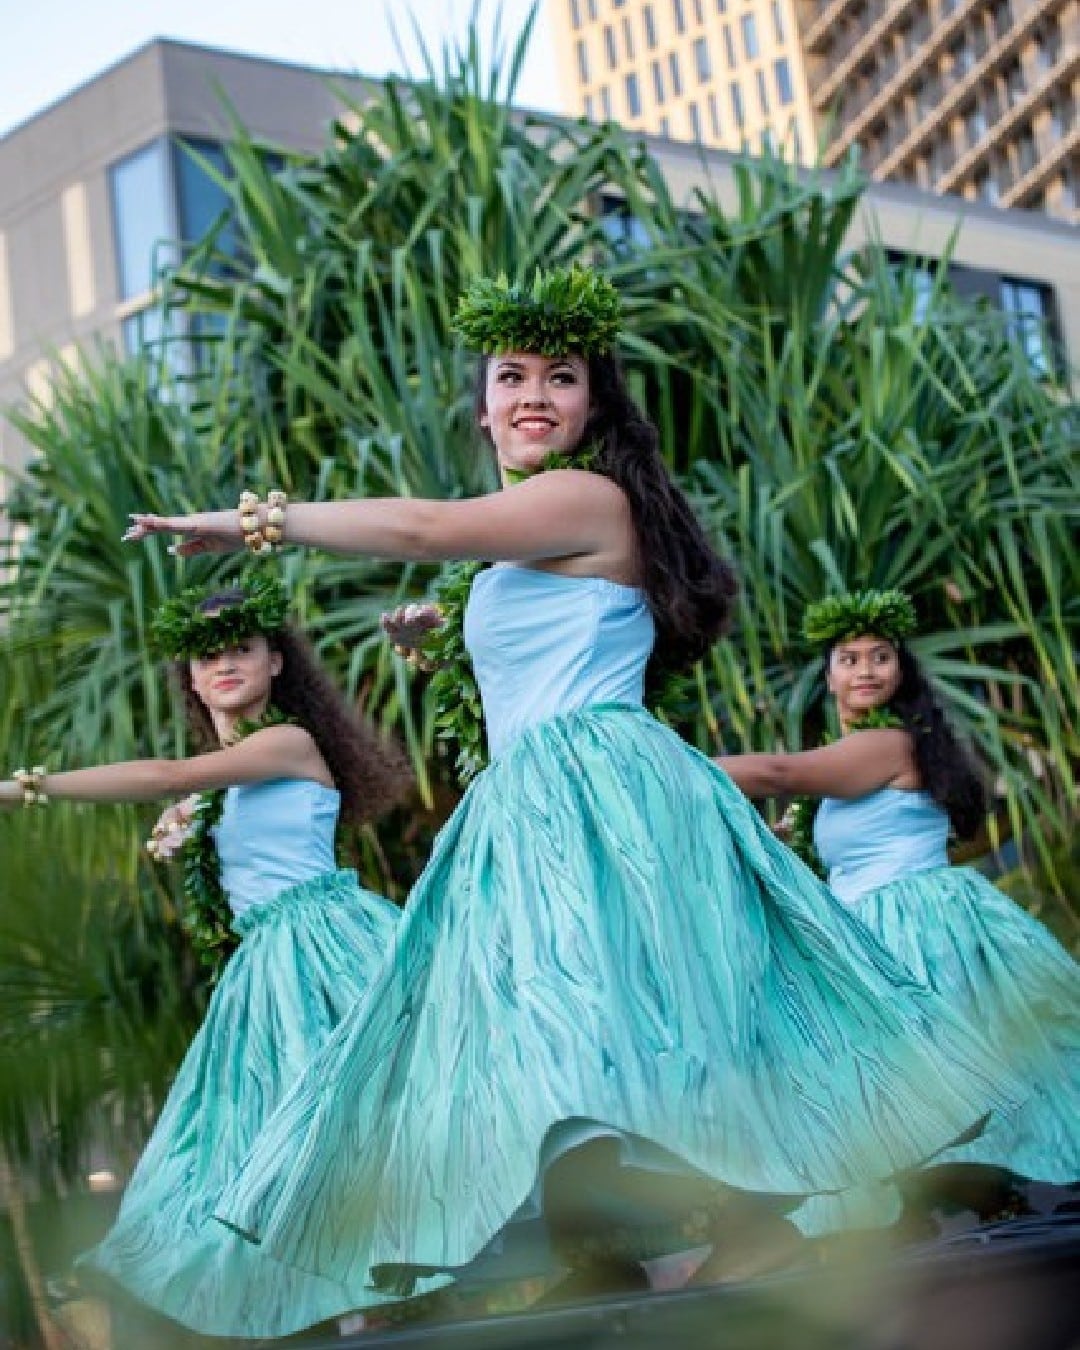 Enjoy the return of Kona Nui Nights on August 10 from 6pm - 8pm in Victoria Ward Park. Bring a blanket or chair and picnic on grab-and-go offerings from local eateries. The evening will feature live music by Hoku Zuttermeister and Kawaikapuokalani Hewett and a celebration of hula from Hālau Hula 'O Puka'ikapuaokalani, Kumu hula Darcy Moniz.